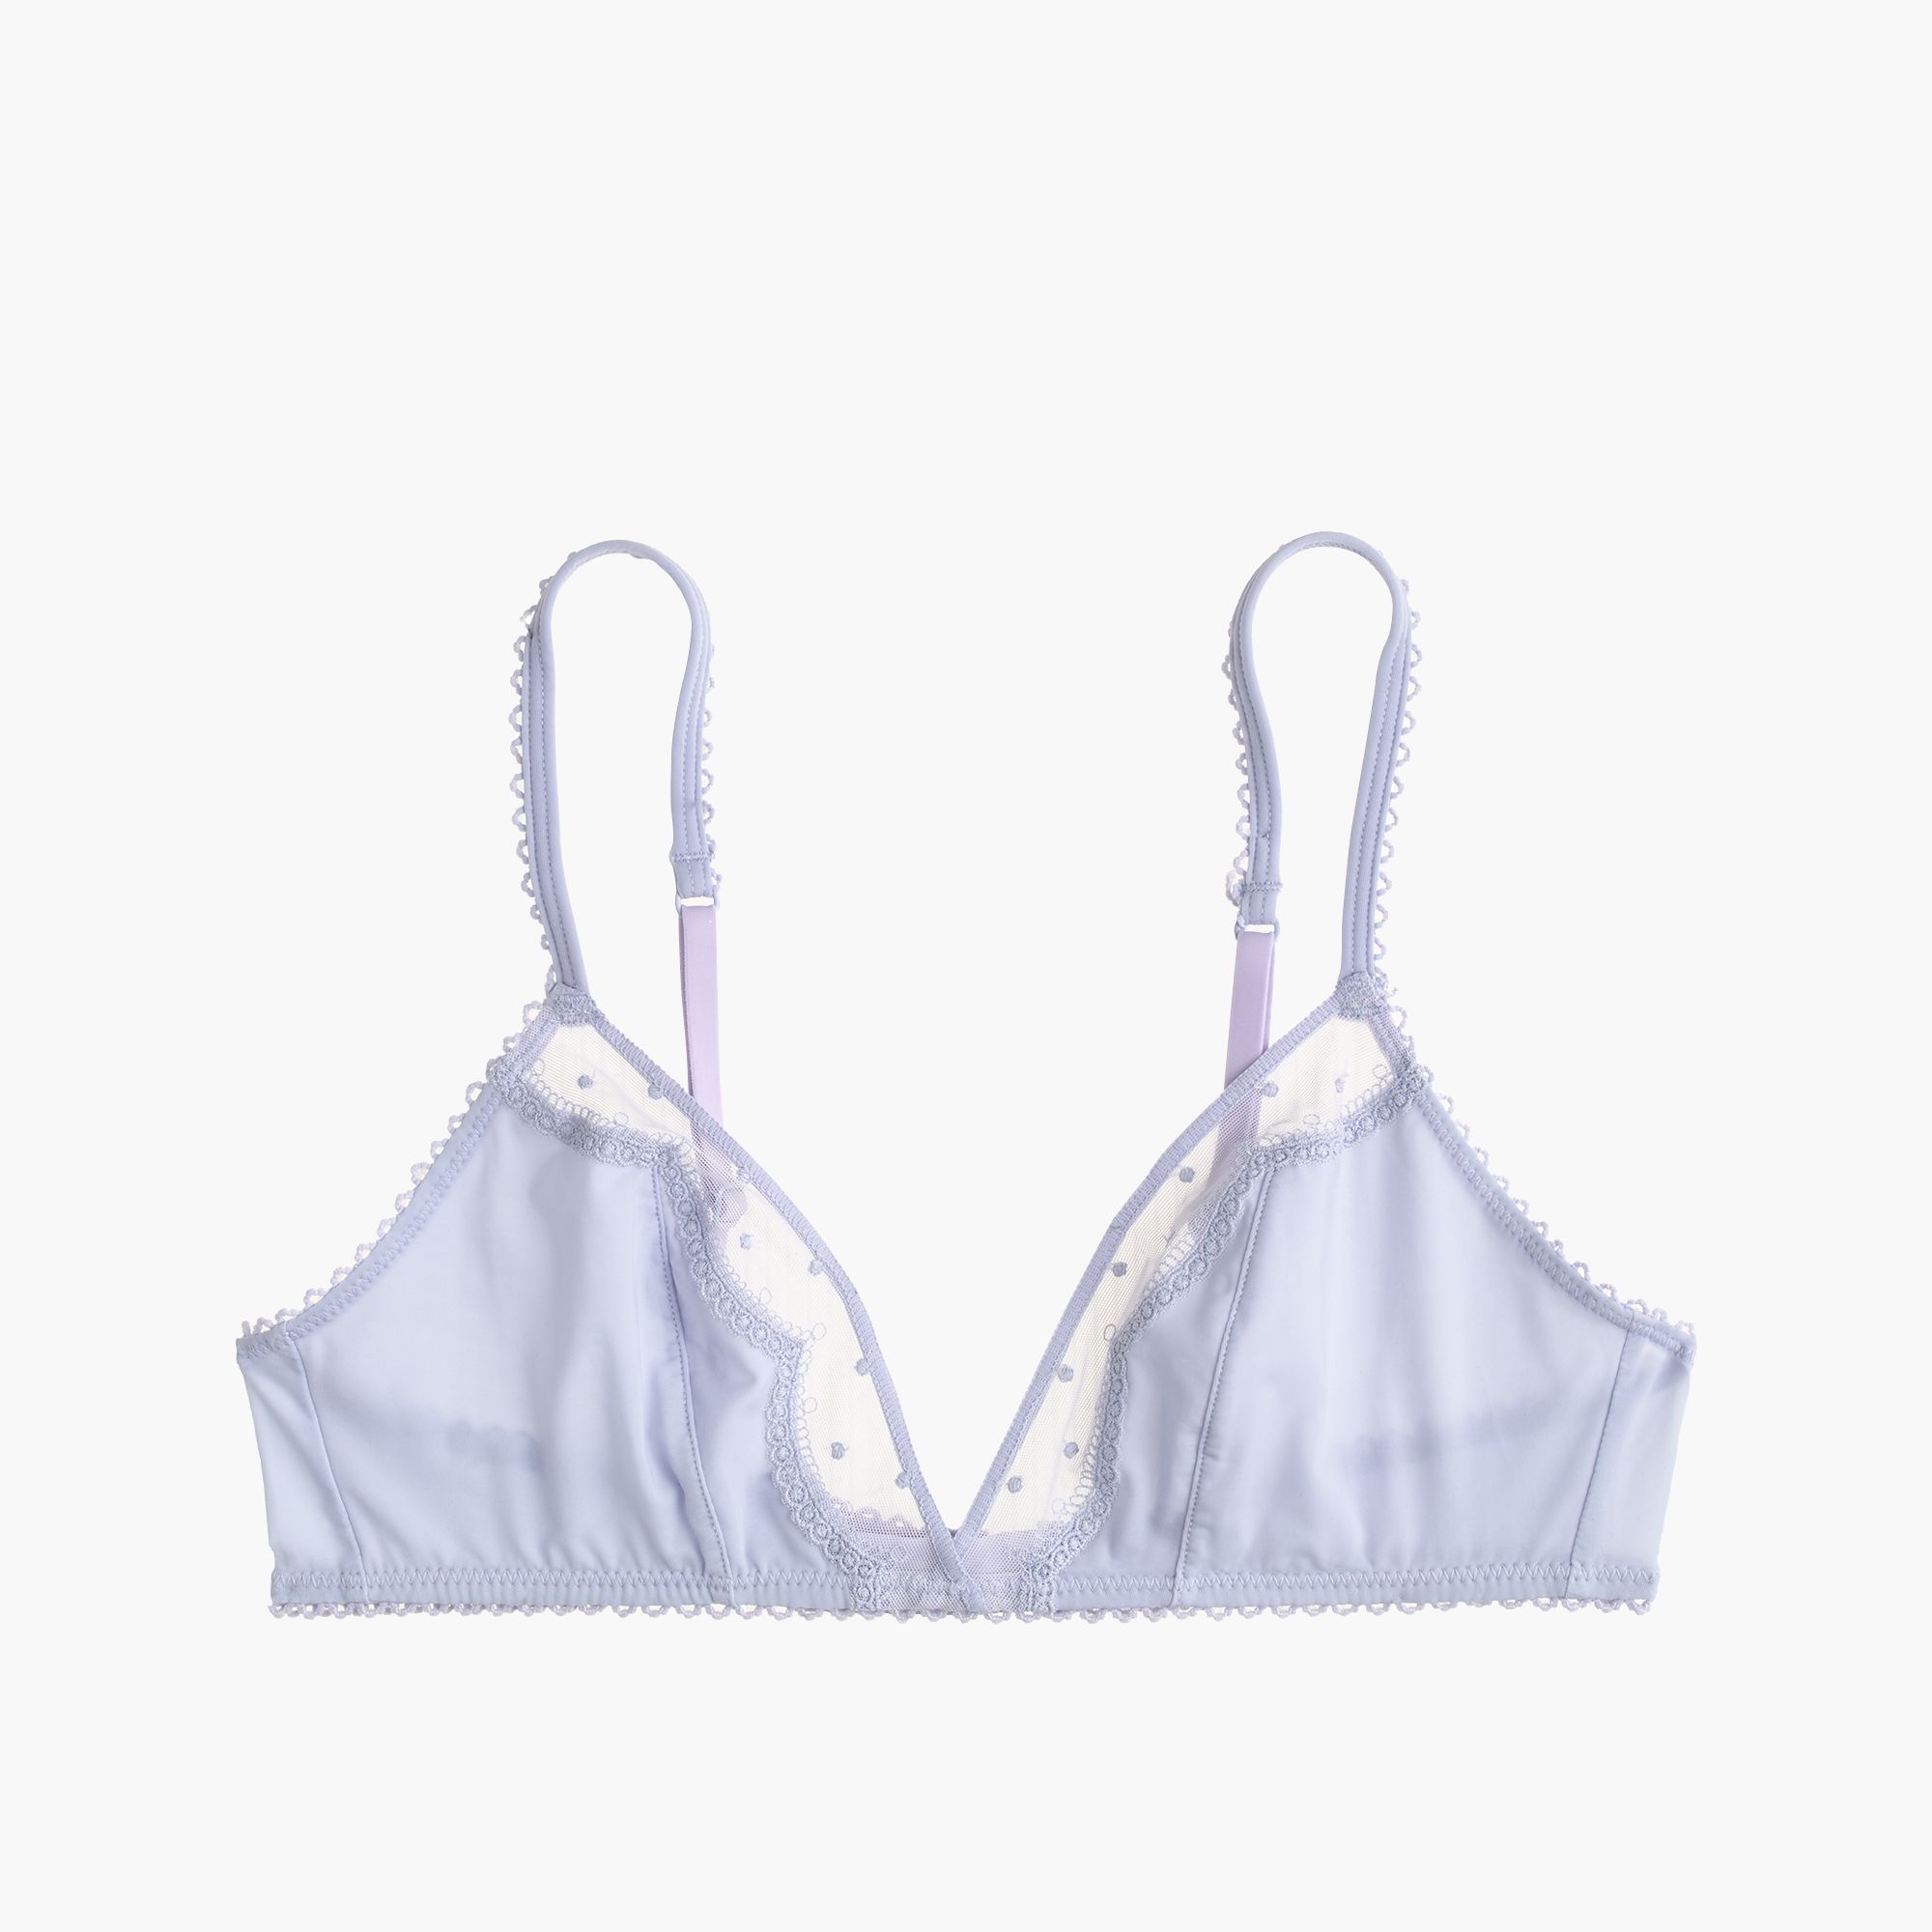 j.crew’s new lingerie collection is bralette heaven